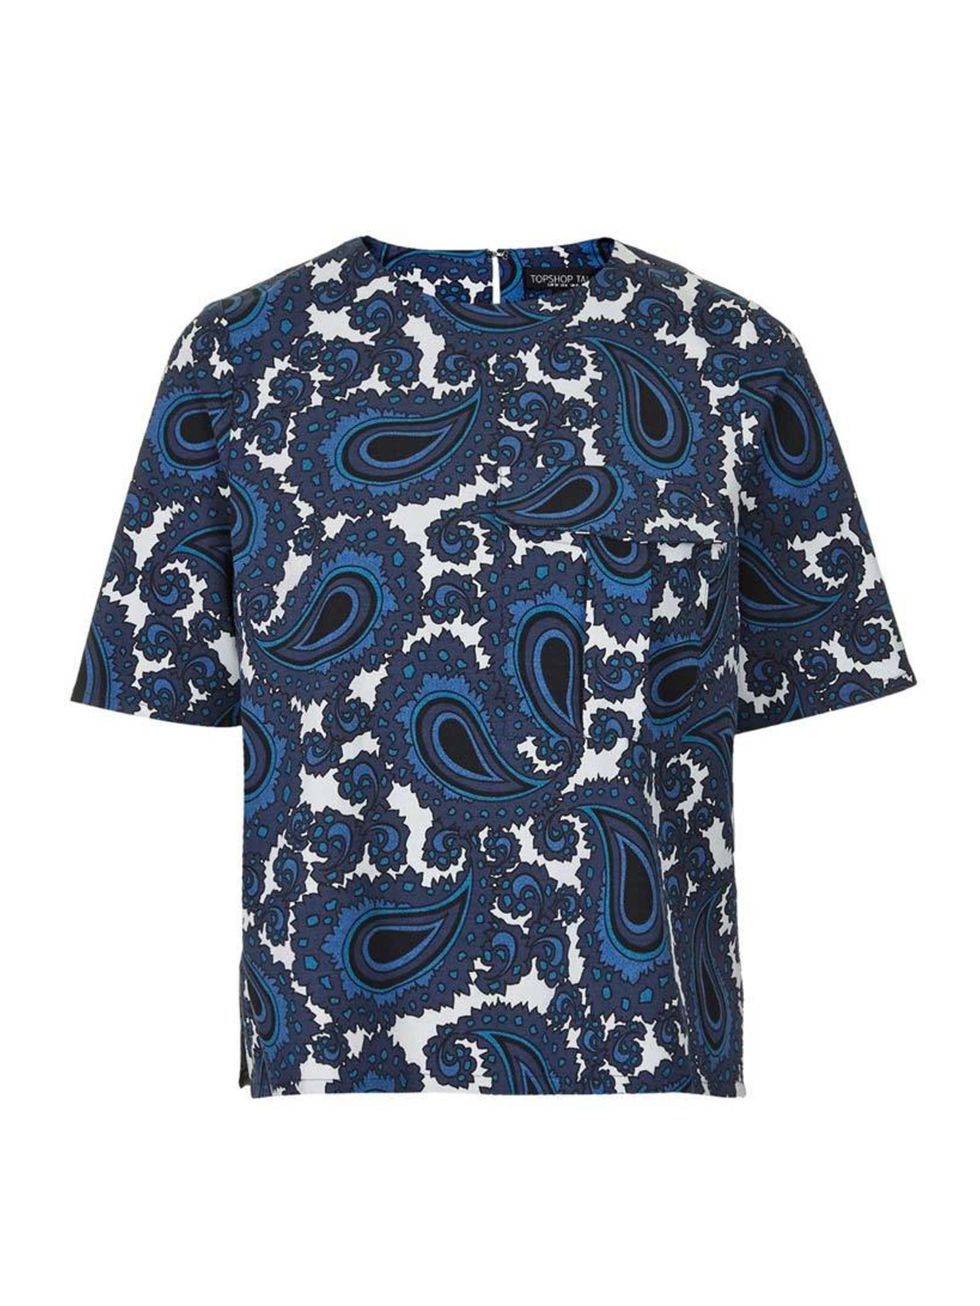 <p>Not sure about this season's floral trend? Try paisley instead...</p>

<p><a href="http://www.topshop.com/en/tsuk/product/new-in-this-week-2169932/new-in-this-week-493/tall-paisley-print-top-4017181?bi=1&ps=200" target="_blank">Topshop</a> t-shirt, £36